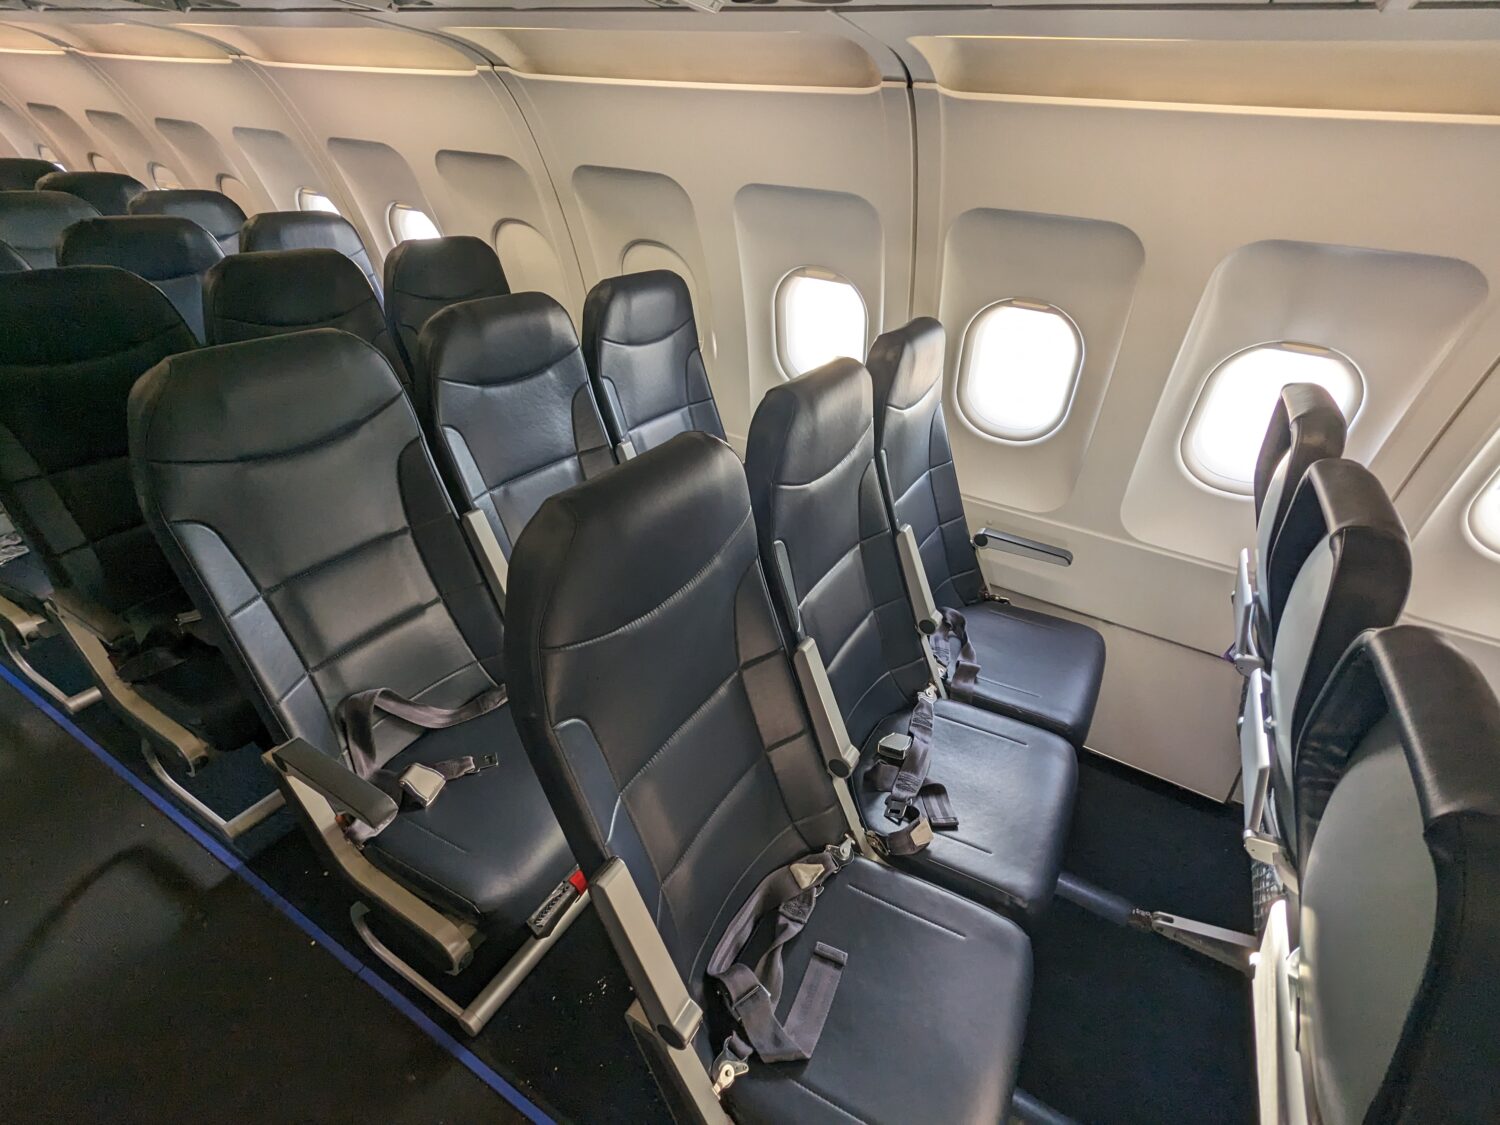 Allegiant Airlines seats A320